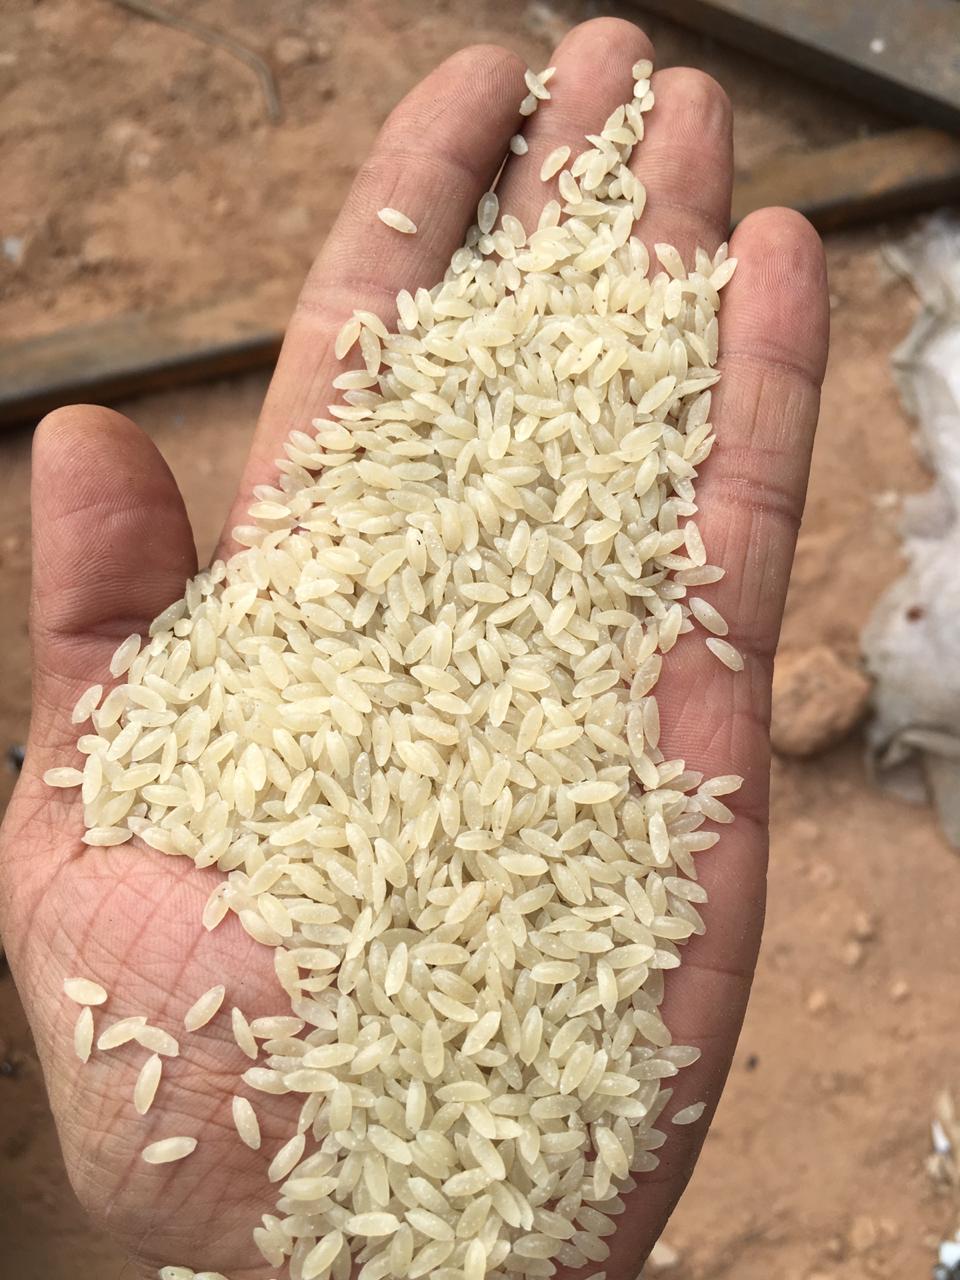 FRK Fortified Rice Extrusion